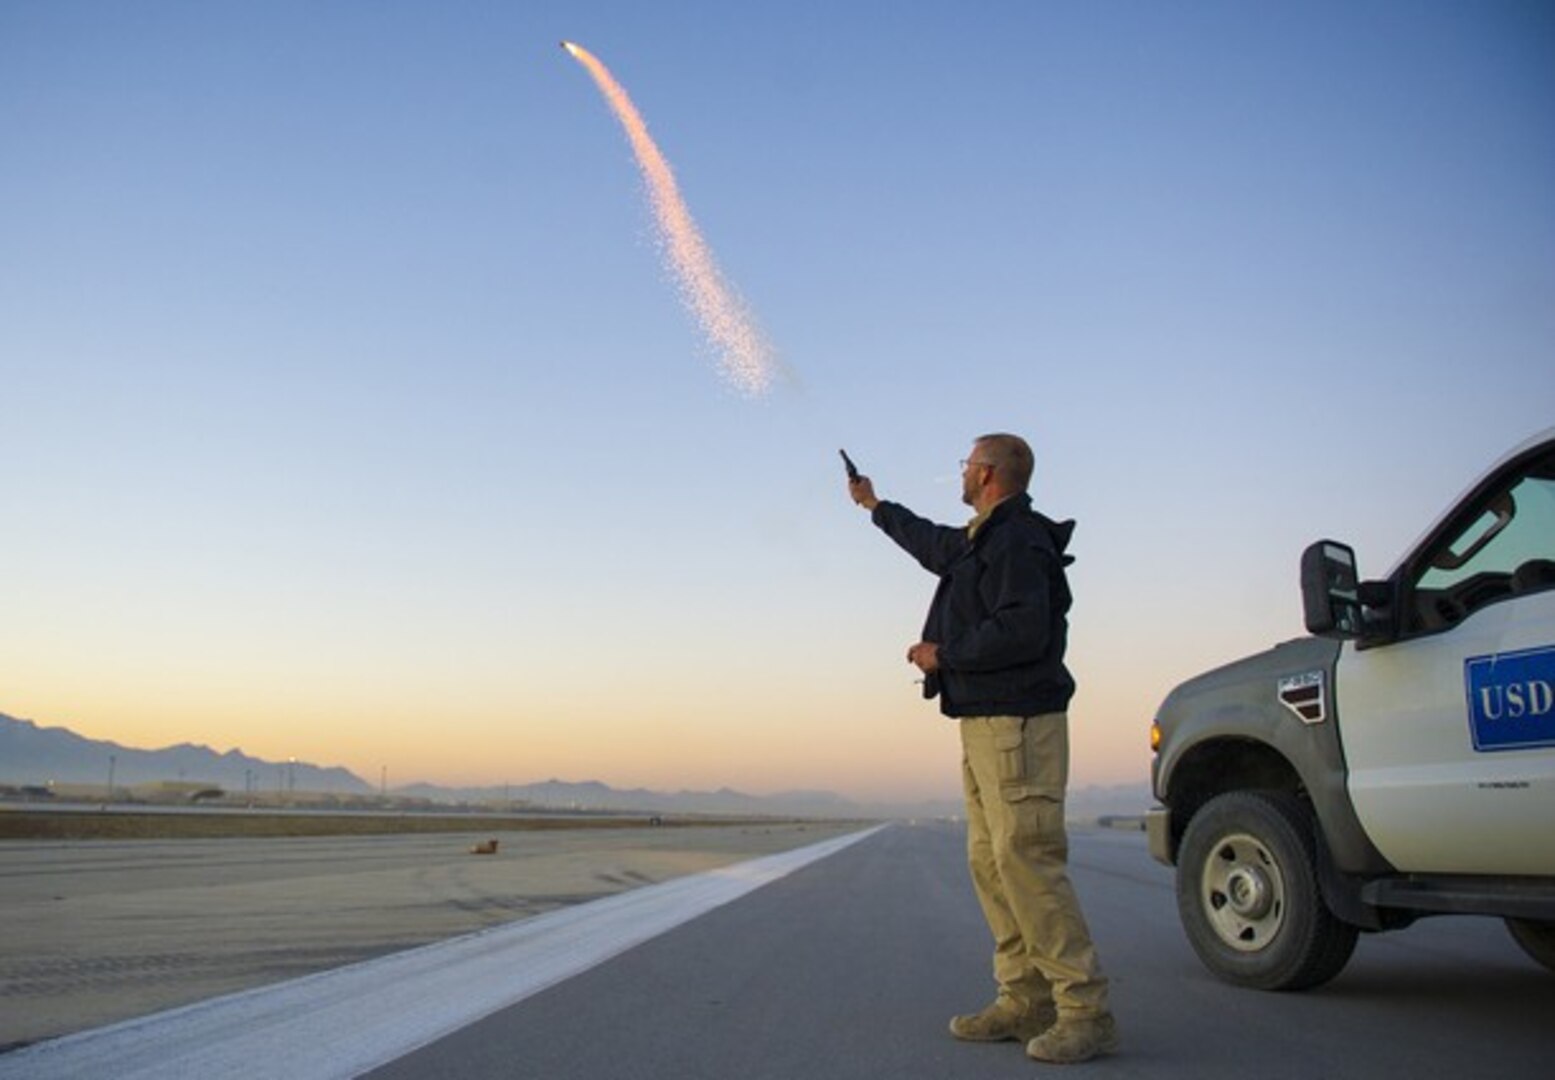 Wildlife biologist Scott Stopak, from the United States Department of Agriculture-Wildlife Services, fires off a pyrotechnic screamer on the flight line at Bagram Air Field, Afghanistan, Feb. 24, 2016. (U.S. Air Force photo by Capt. Bryan Bouchard)